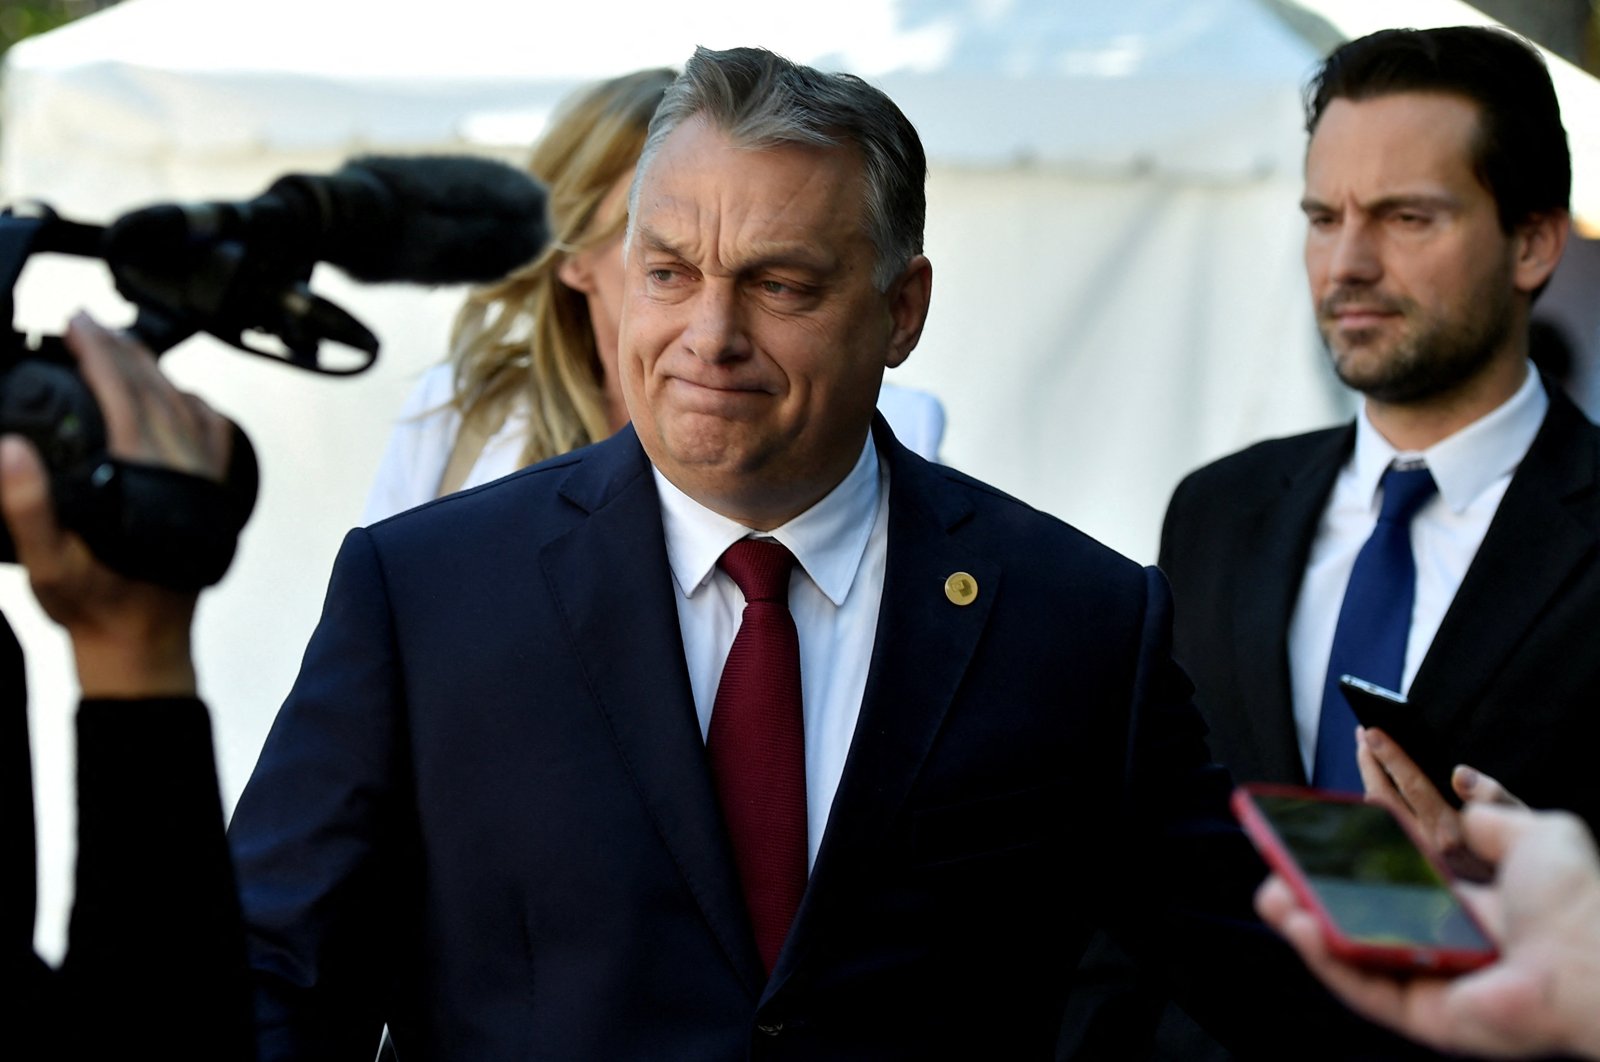 Hungarian Prime Minister Victor Orban arrives at a European People&#039;s Party (EPP) meeting ahead of a EU summit in Brussels, Belgium, June 28, 2018. (Reuters Photo)